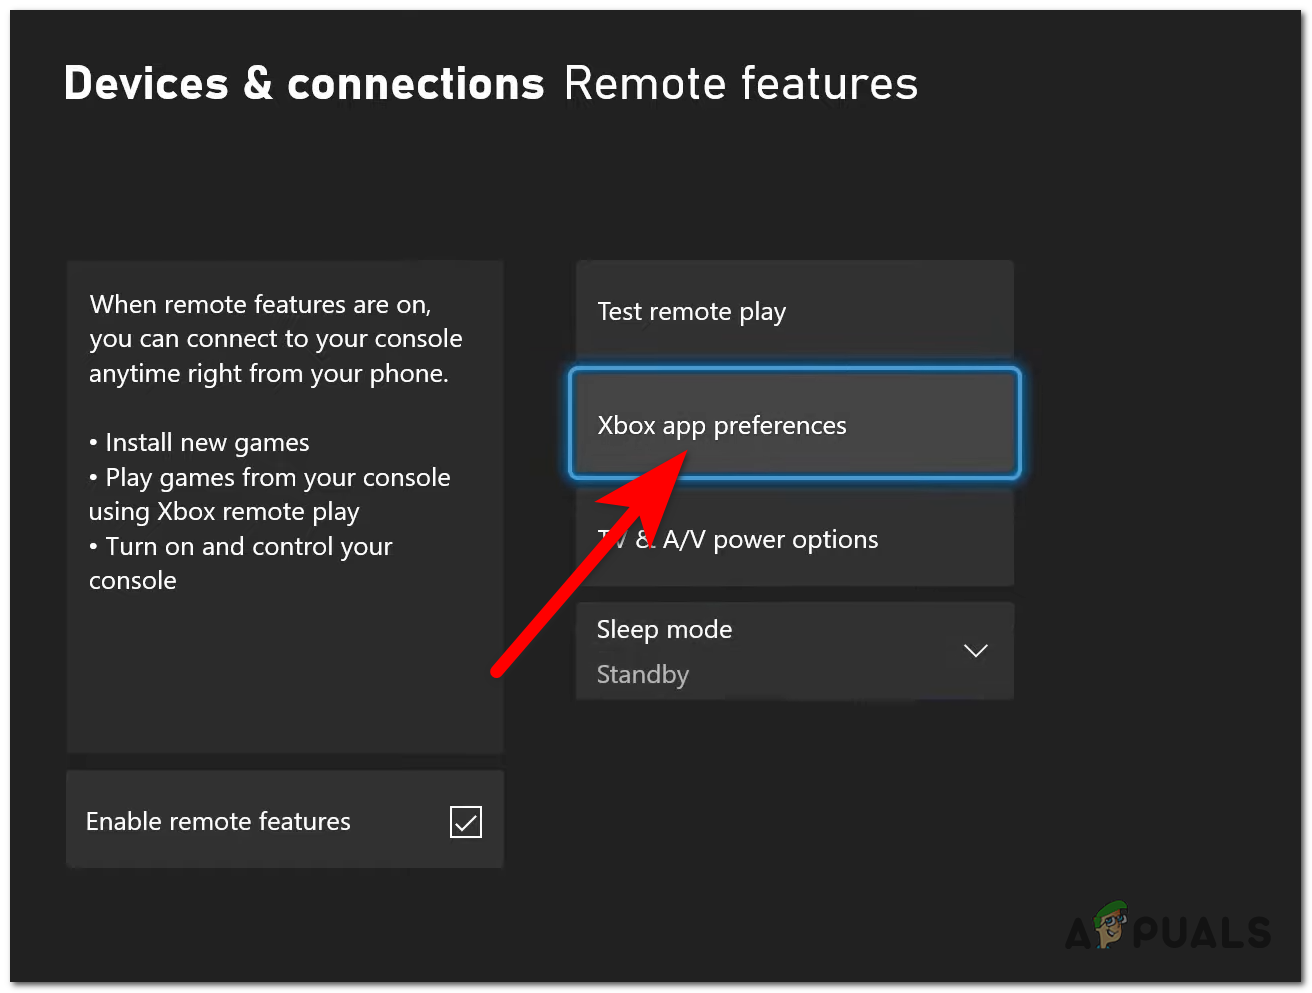 Accessing the Xbox app preferences